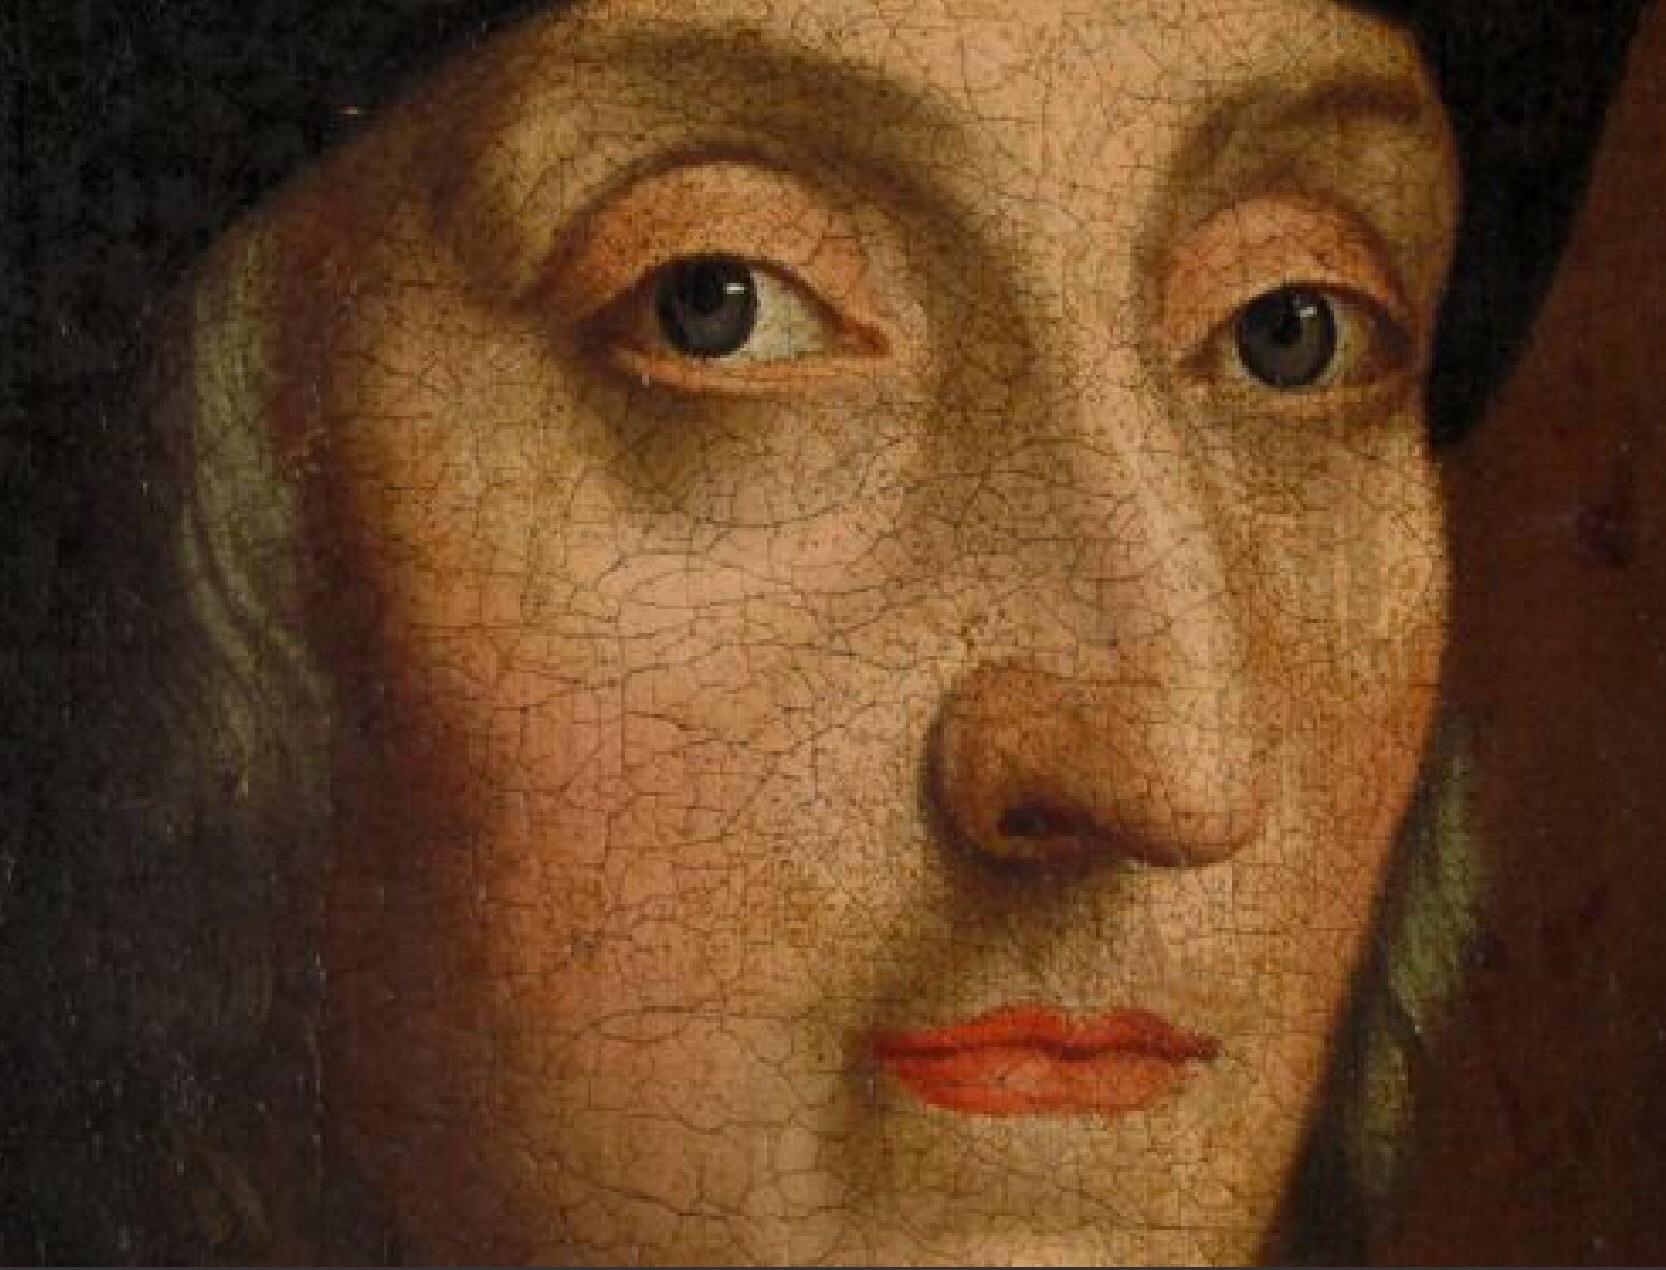 MAGNIFICENT IMPORTANT OIL PORTRAIT PAINTING OF KING HENRY VII (7TH) Estimated Dateline Early 17th Century. 

RARE SURVIVING COPY (LATER CUT DOWN) AFTER HANS HOLBEIN THE YOUNGER WHITEHALL PALACE DYNASTY MURAL OF(1536-37) WITH LATER ADDITION OF